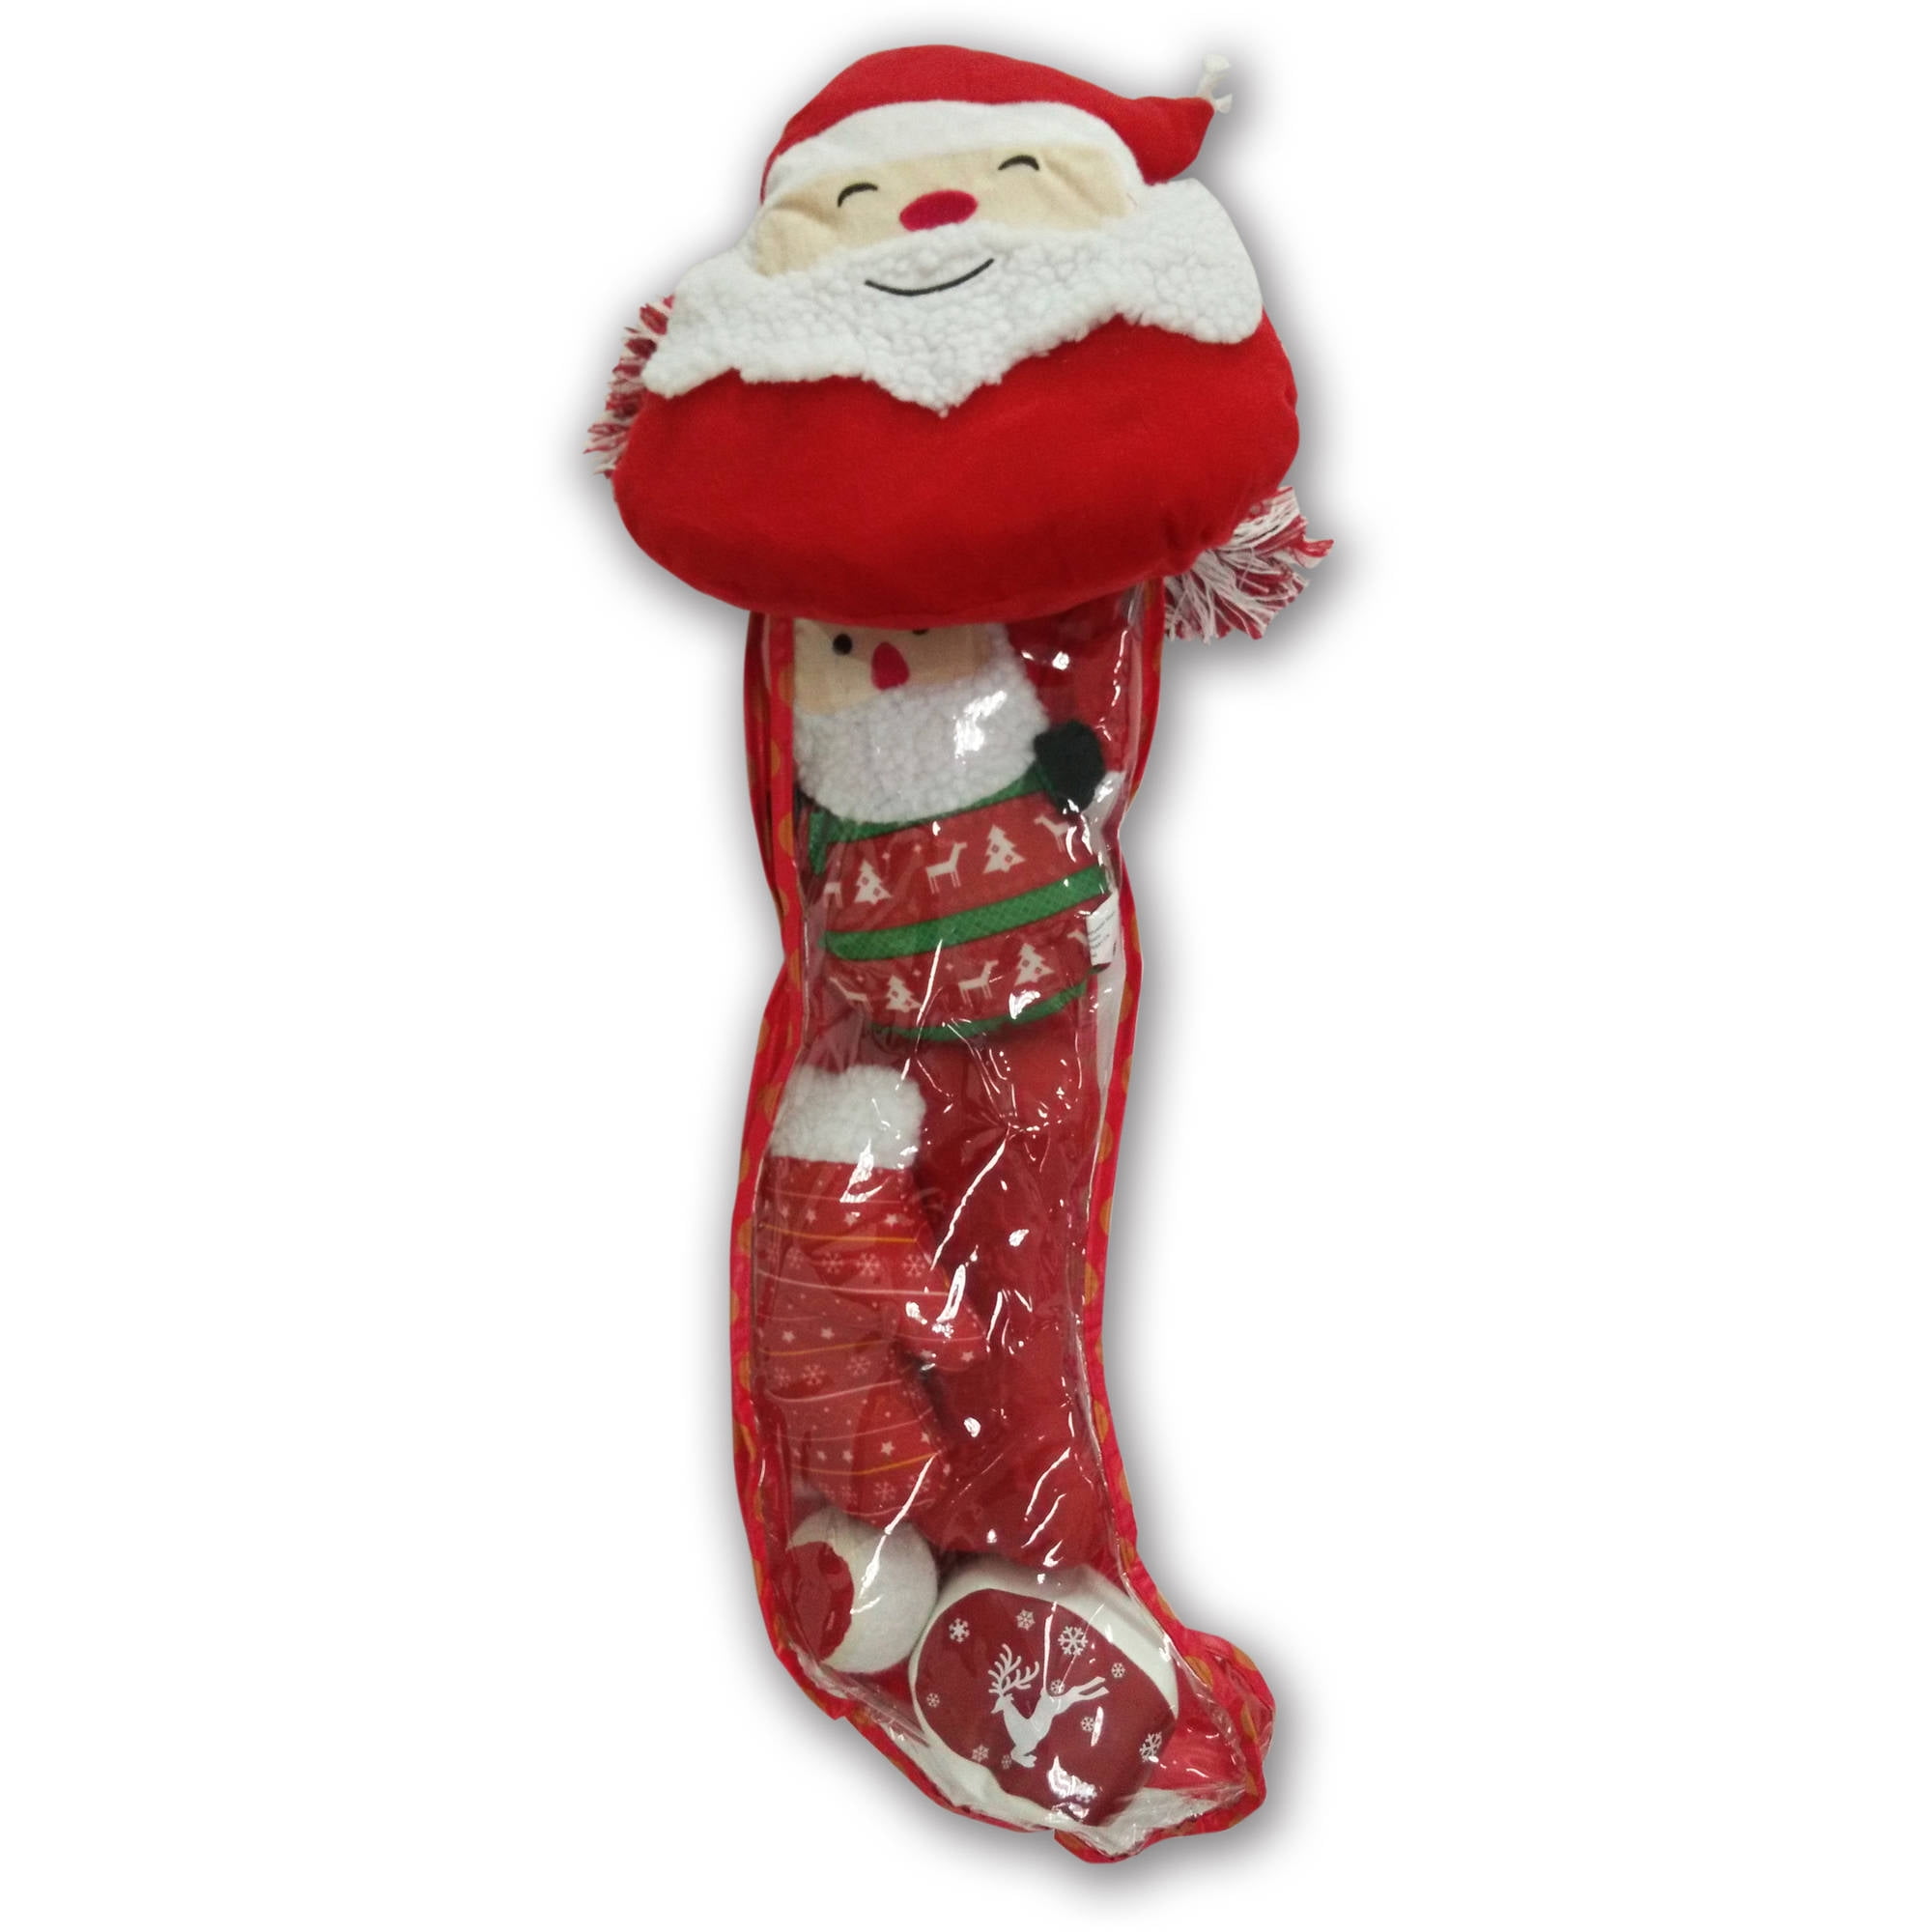  Christmas Stocking Dog Gift - XL Santa Egg - Soft Squeaky Dog  Toys - Rubber (Latex) - Medium - Large Breeds Senior Dogs - 5.5 Tall -  Complies with Same